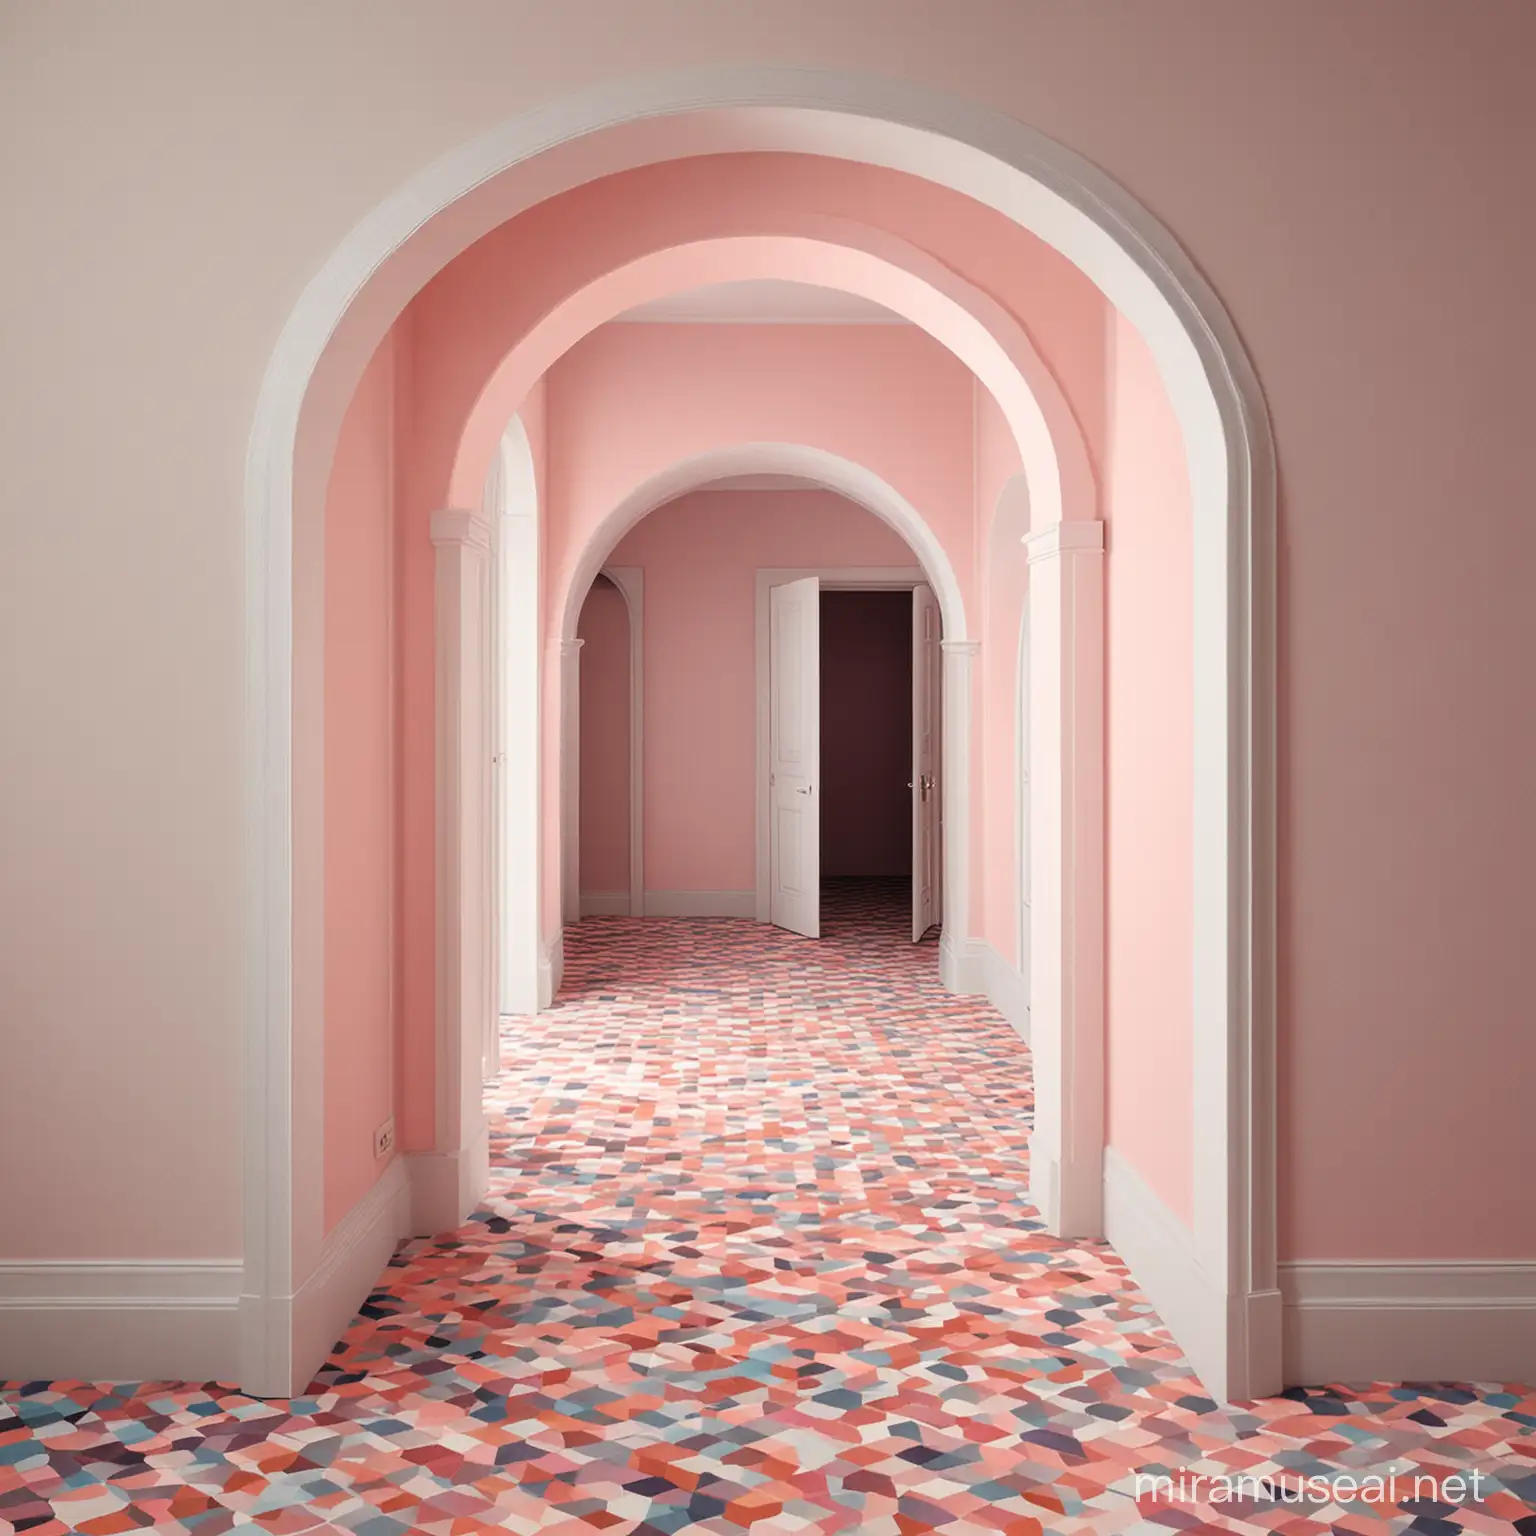 Vibrant Geometric Optical Illusion with Multilayered Doorways and Secret Passages